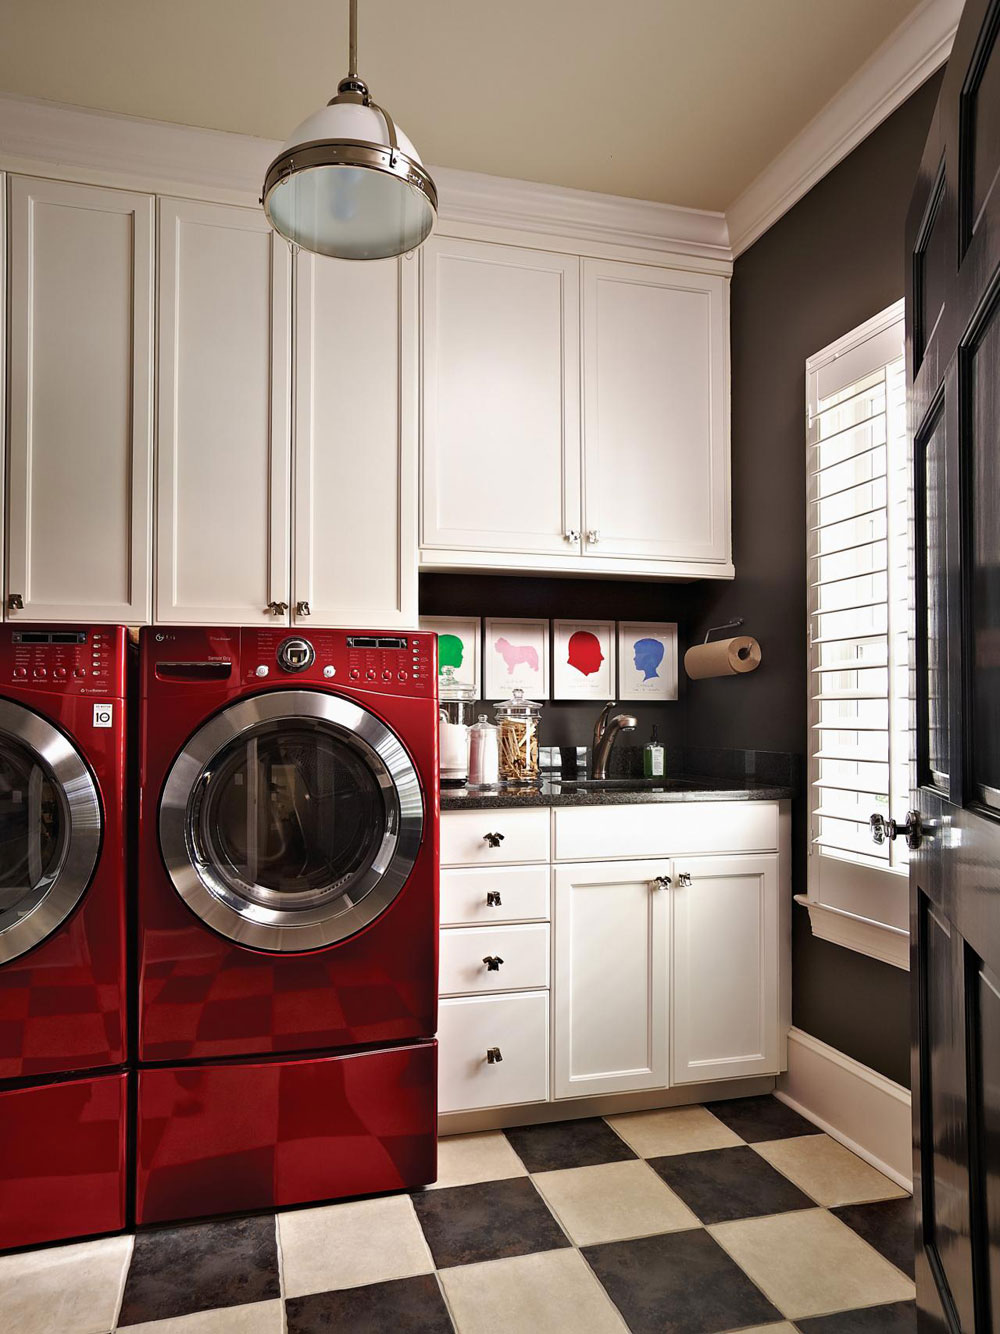 Laundry-Room-Ideas-For-A-Clean-House-4 Laundry Room Ideas For A Clean House